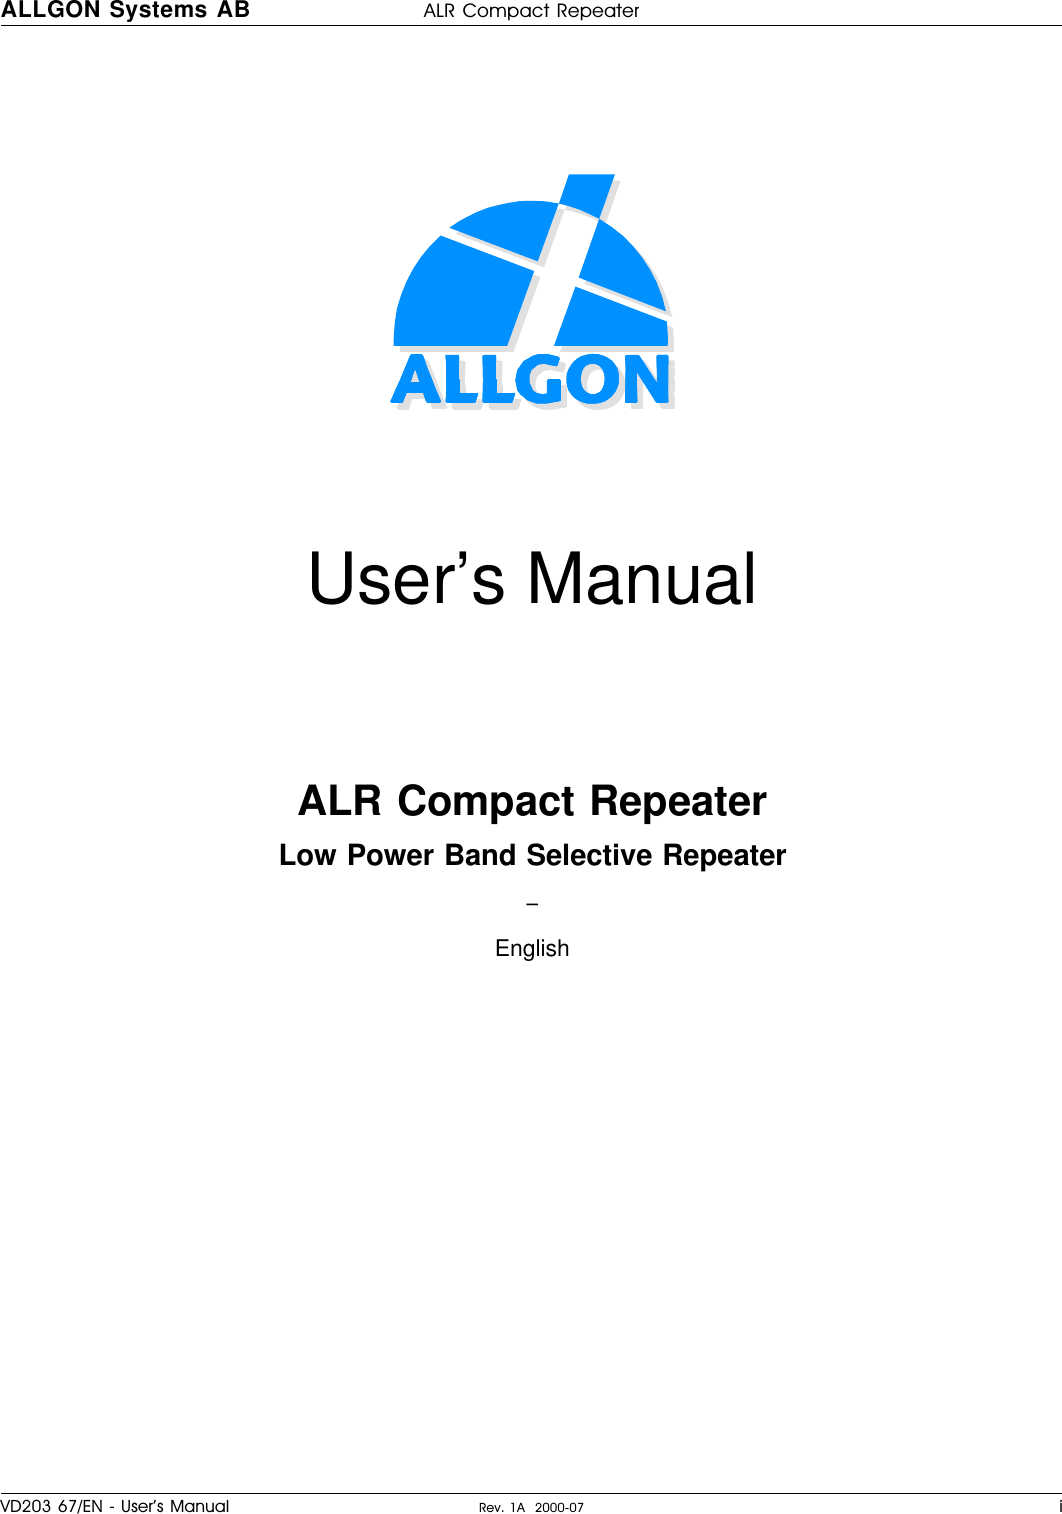 User’s ManualALR Compact RepeaterLow Power Band Selective Repeater–EnglishALLGON Systems AB ALR Compact RepeaterVD203 67/EN - User’s Manual Rev. 1A  2000-07 i